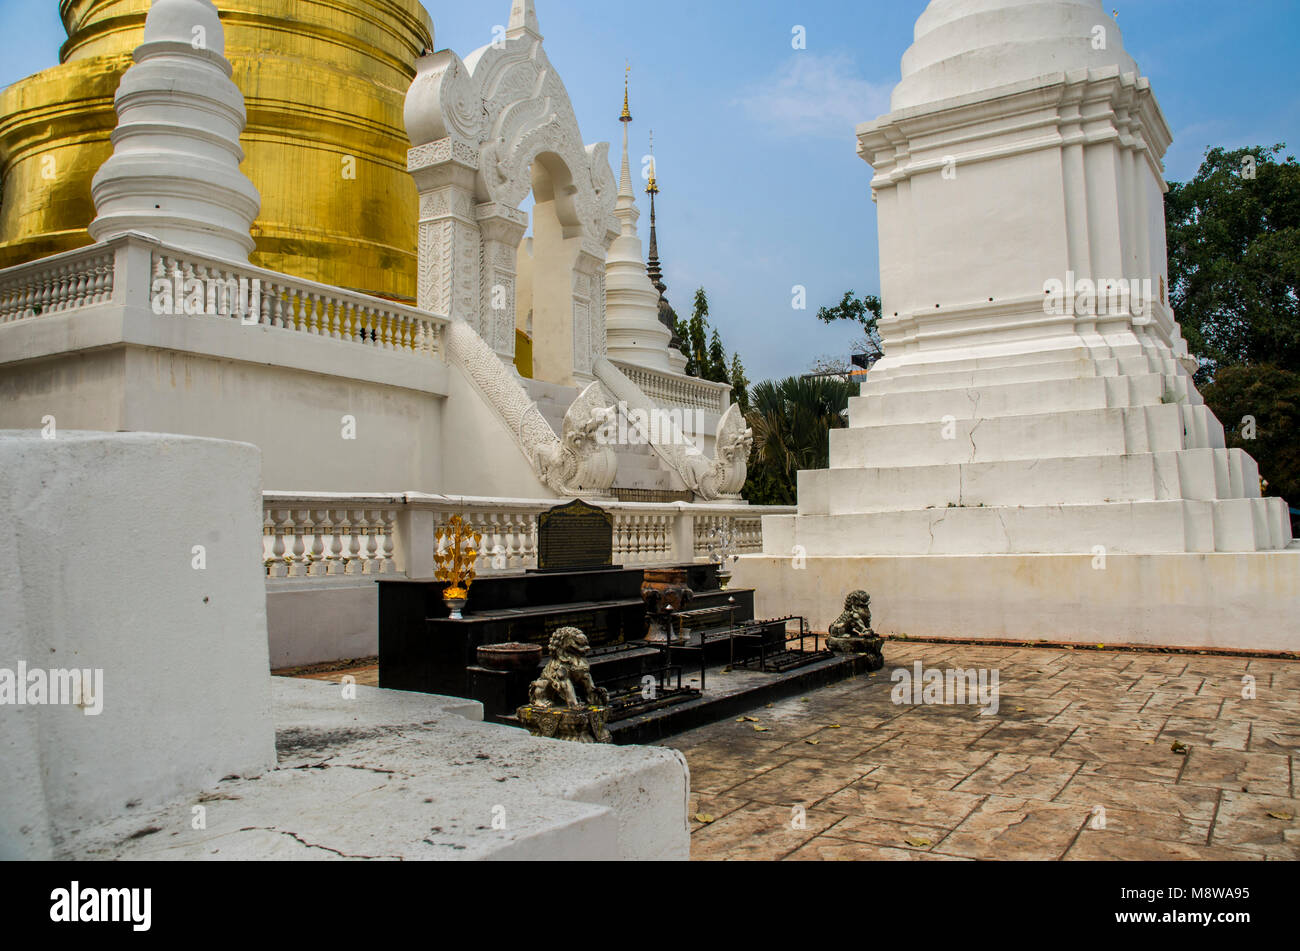 Wat Suan Dok Buddhist temple at Chiang Mai,Thailand. Stock Photo